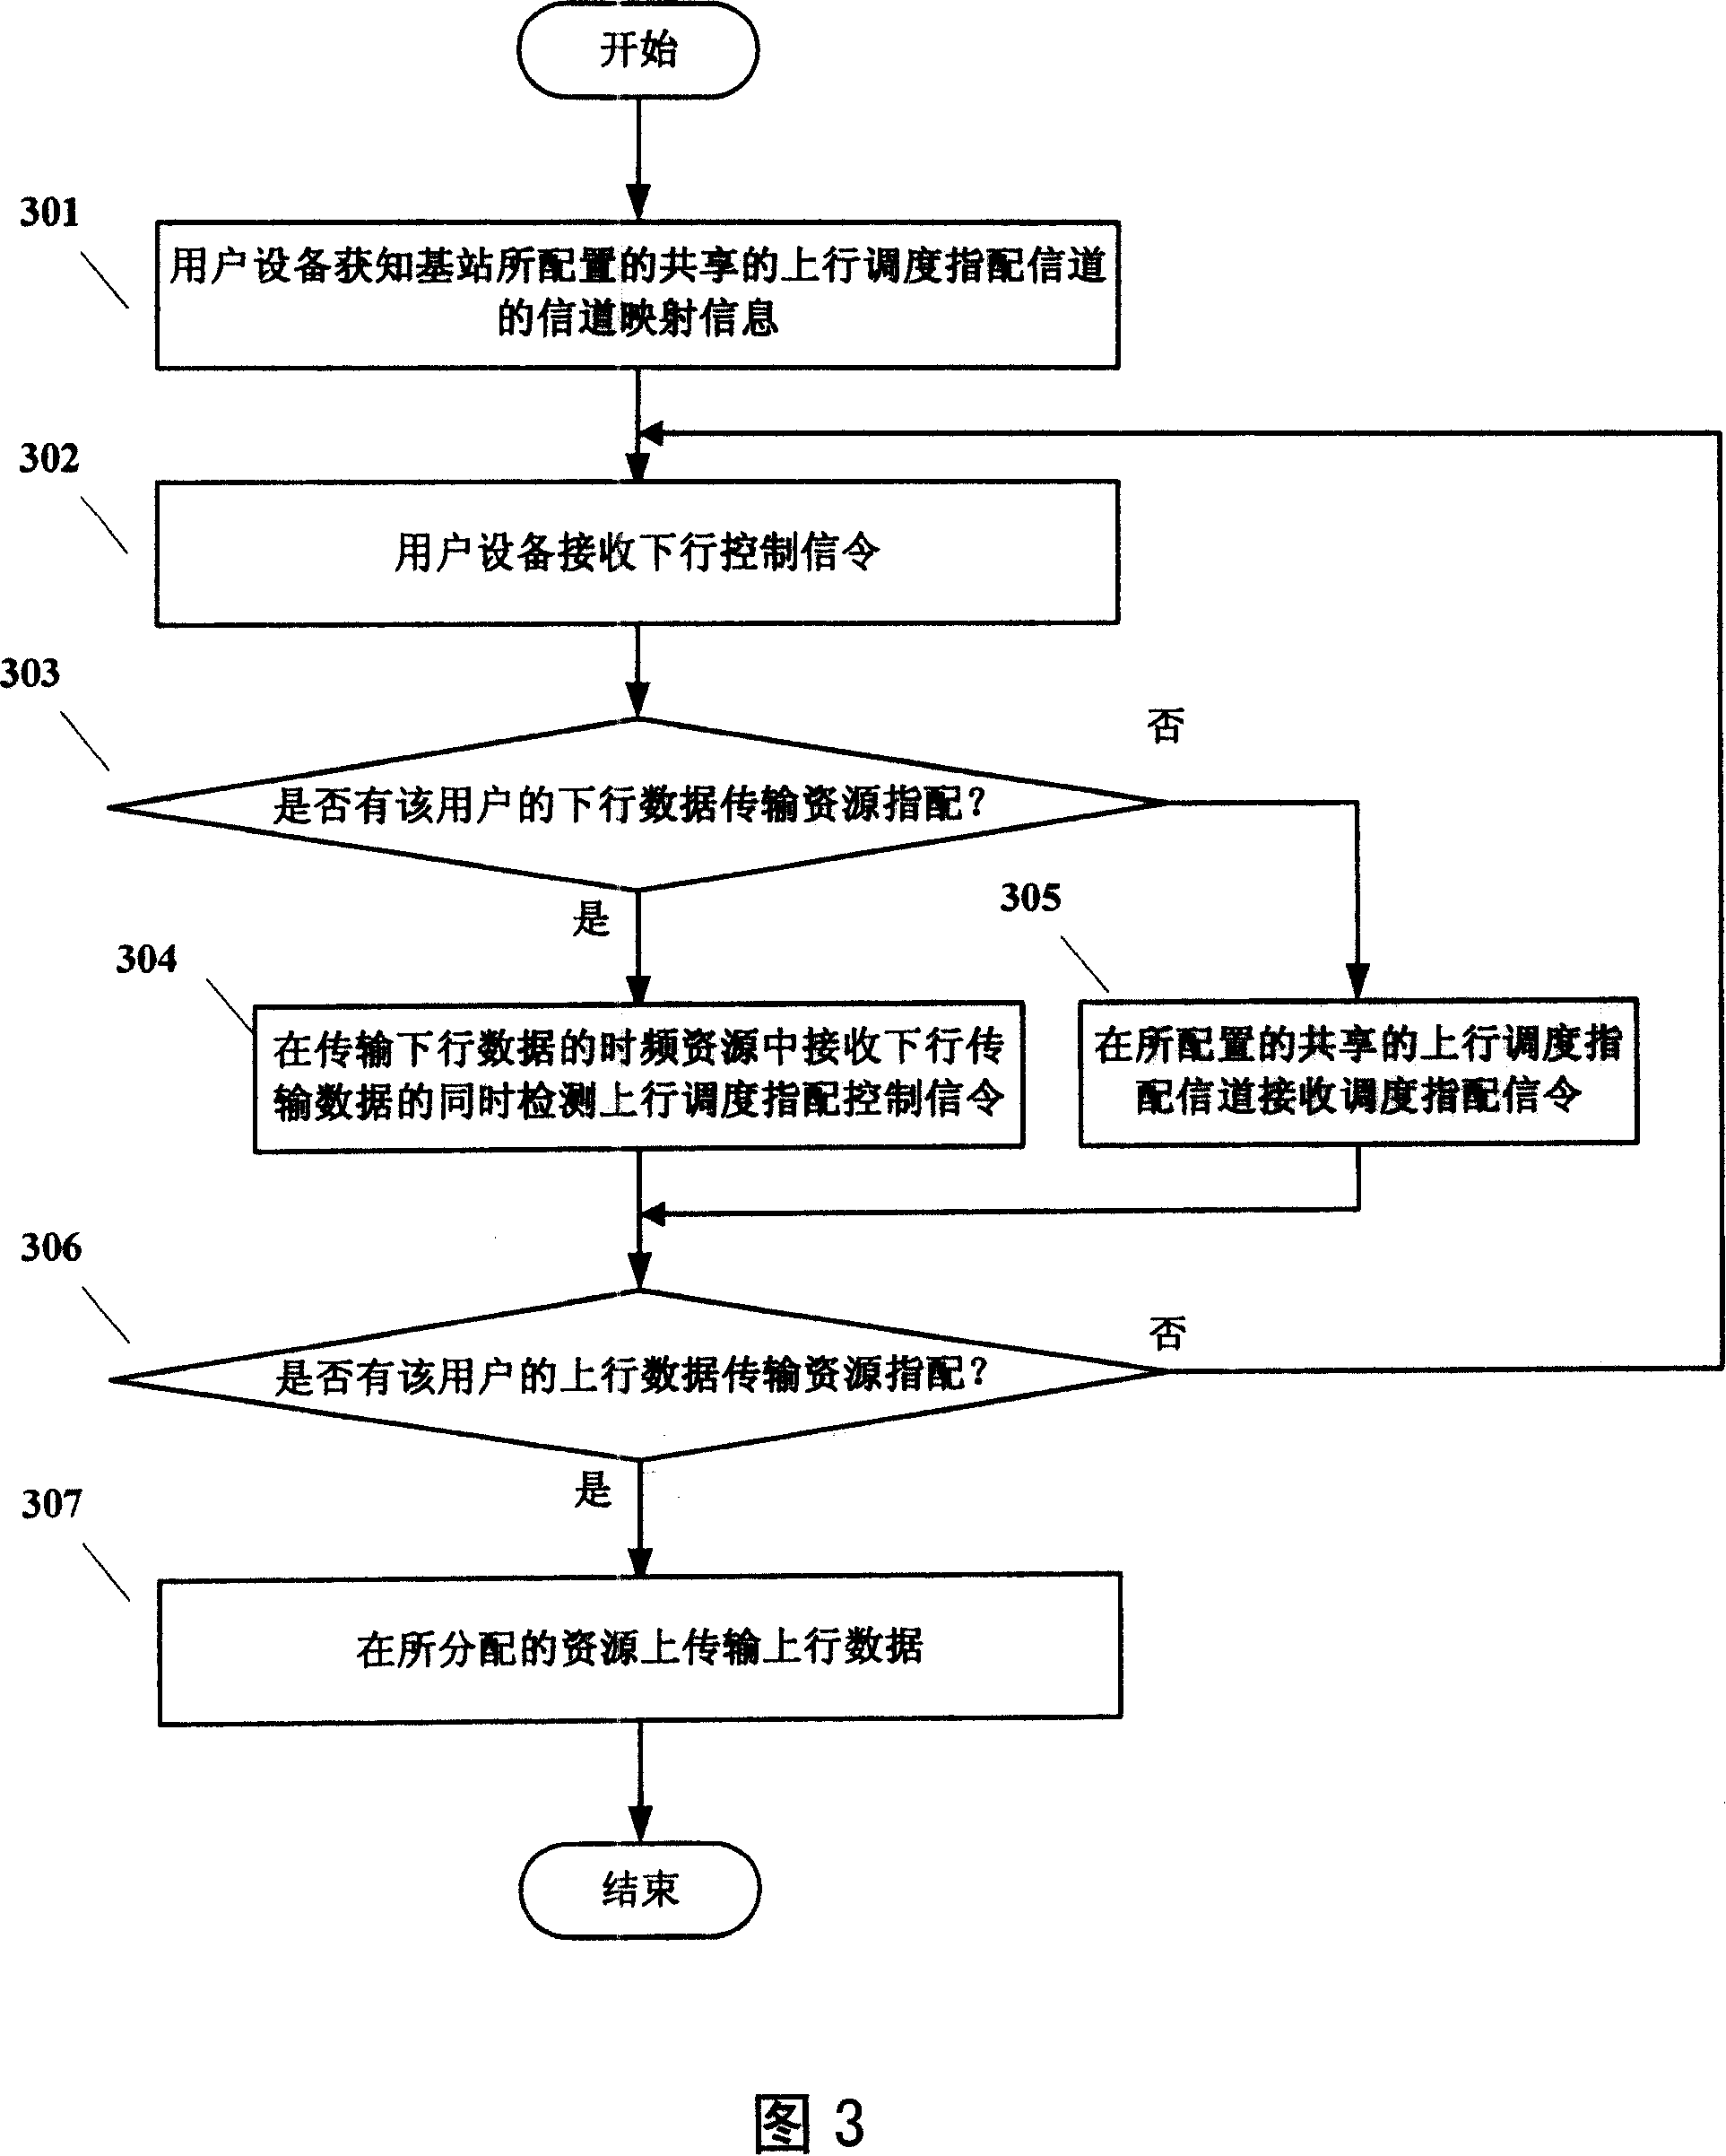 Transmission method and device for ascending scheduling assignment